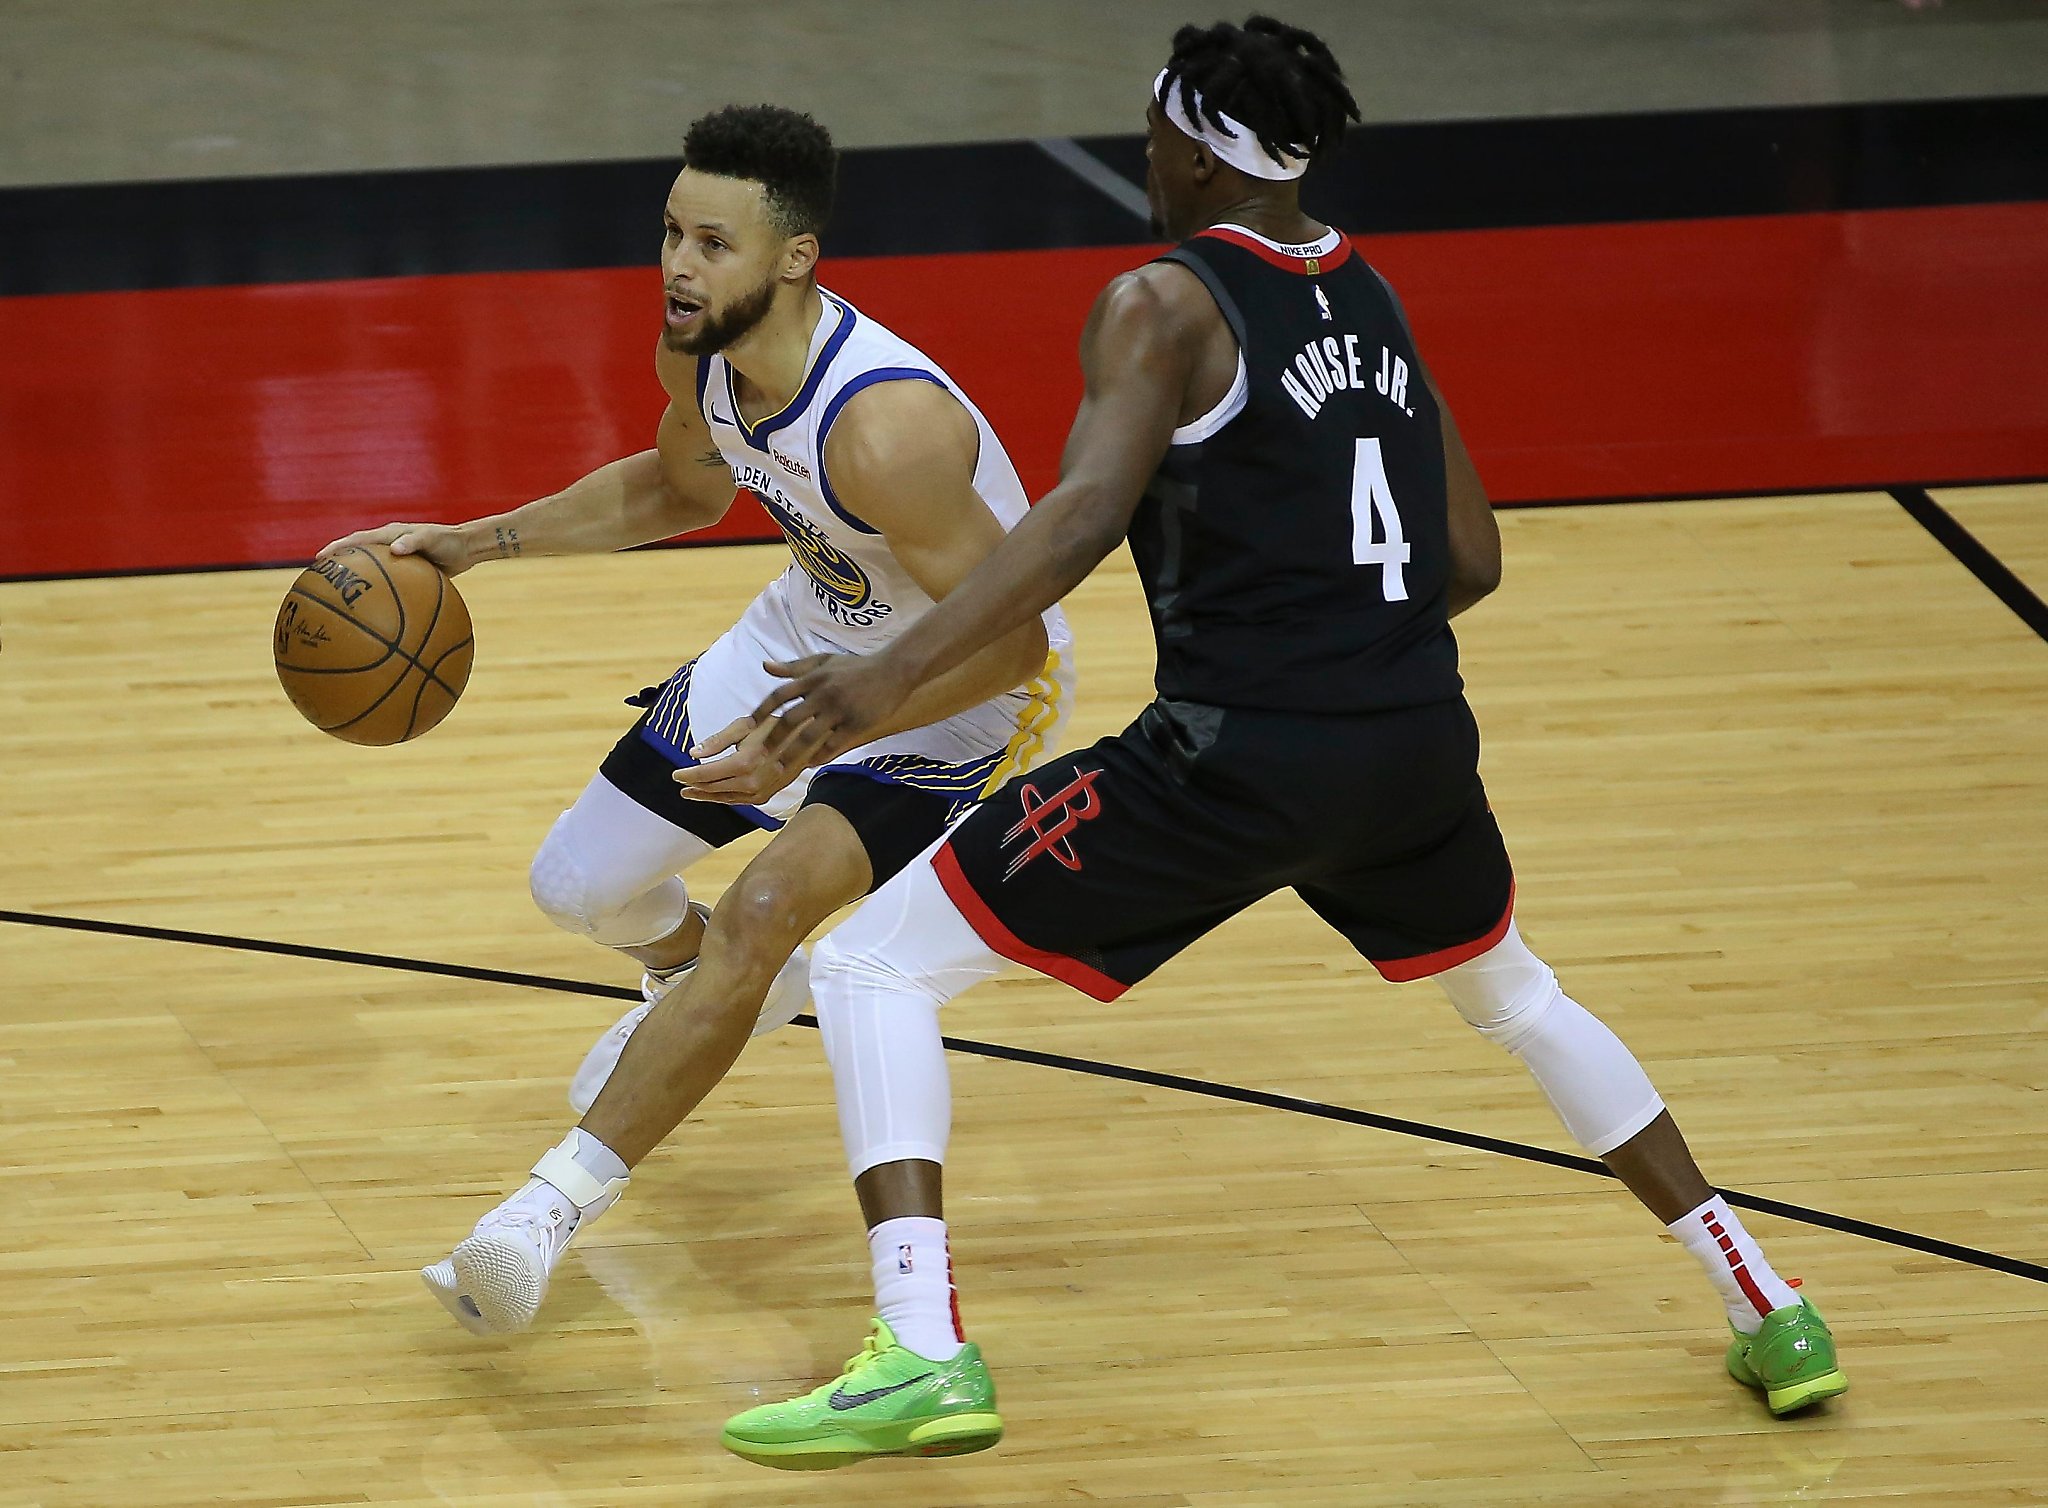 Injury Report: Steph Curry, Kelly Oubre Jr. doubtful vs. Grizzlies